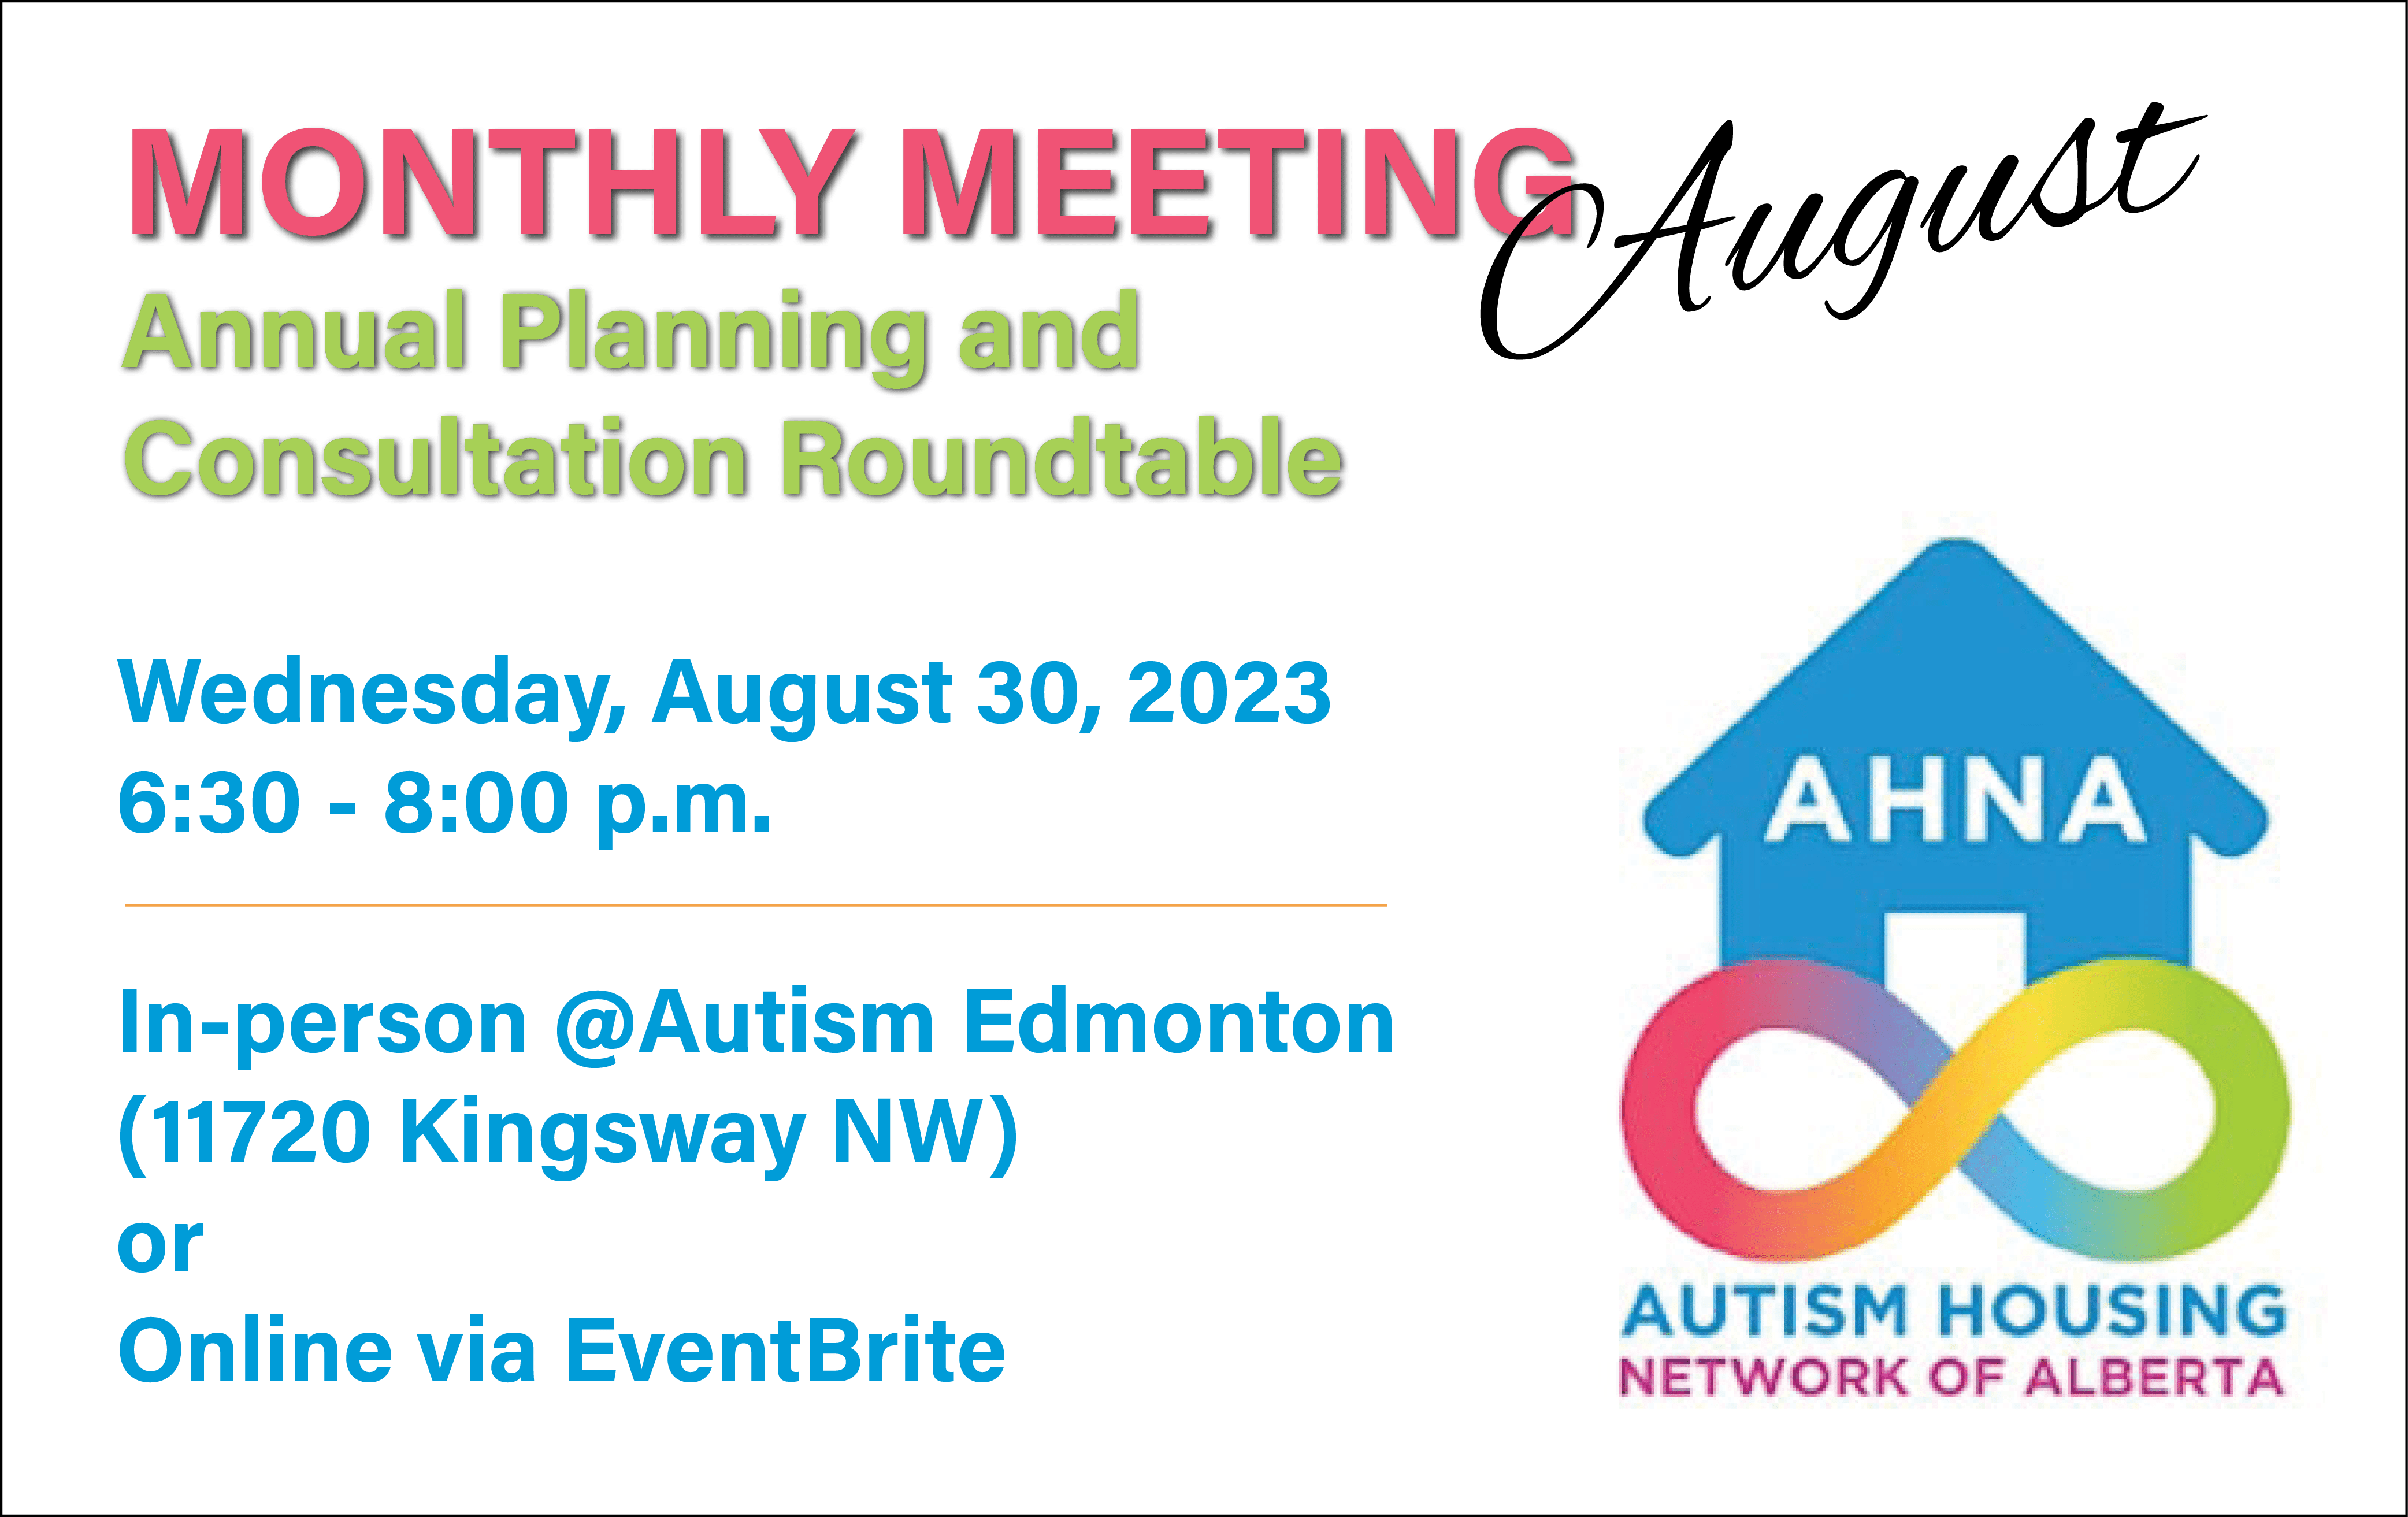 On the right side of the image is the Autism Housing Network of Alberta's logo, which features an illustration of a blue house sitting on top of a rainbow infinity symbol.